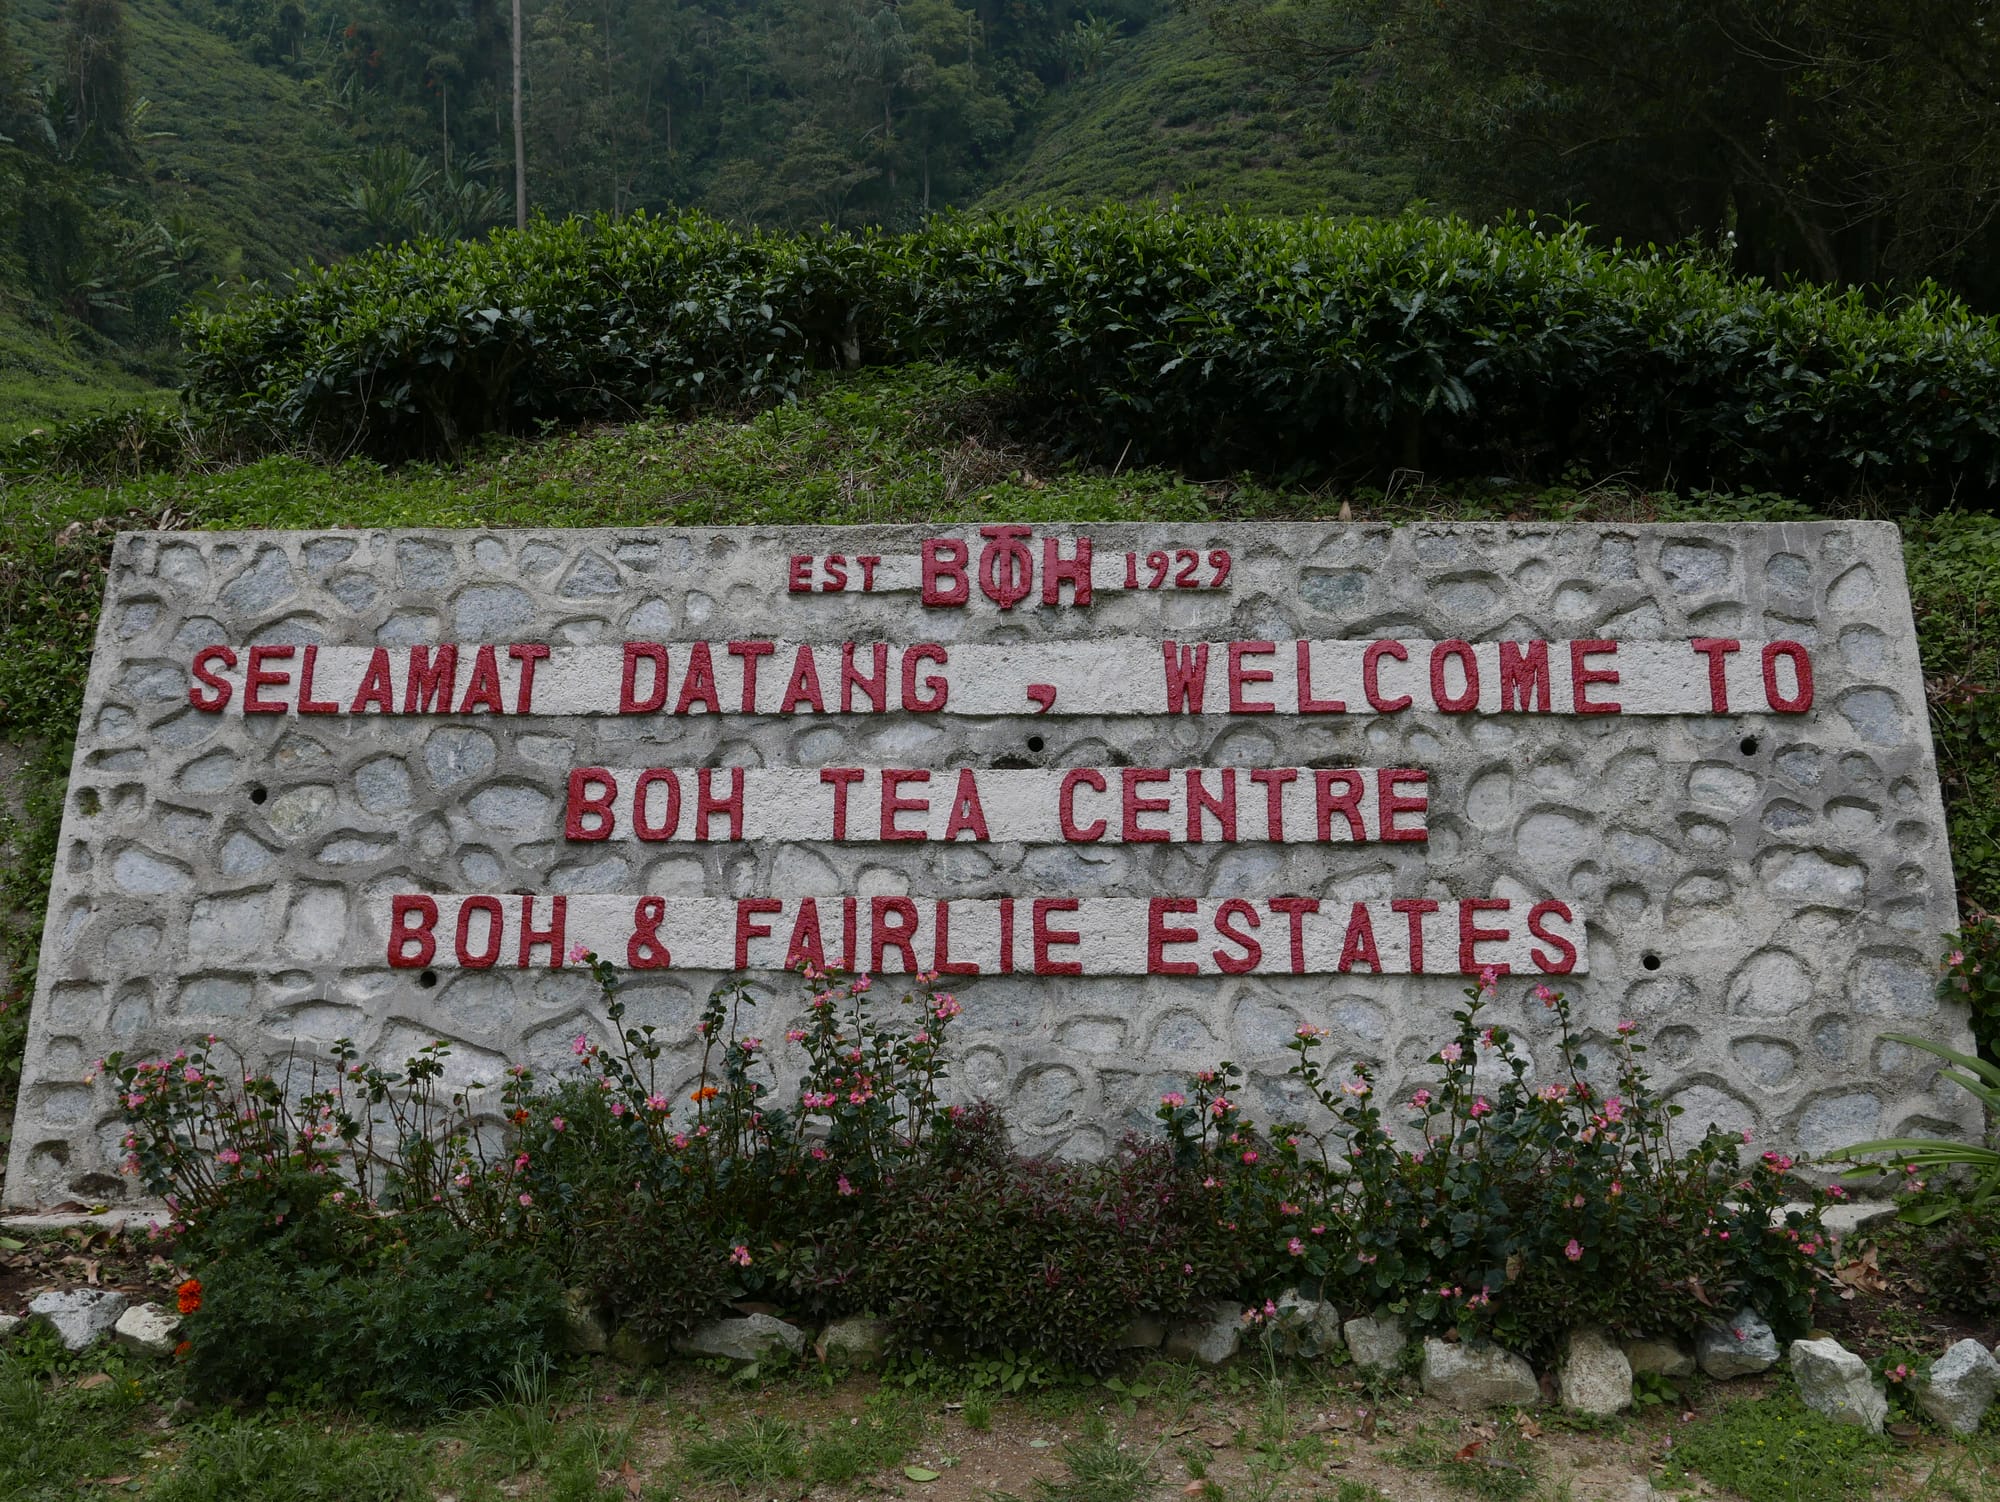 Photo by Author — welcome to the BOH Tea Plantations, Cameron Highlands, Malaysia